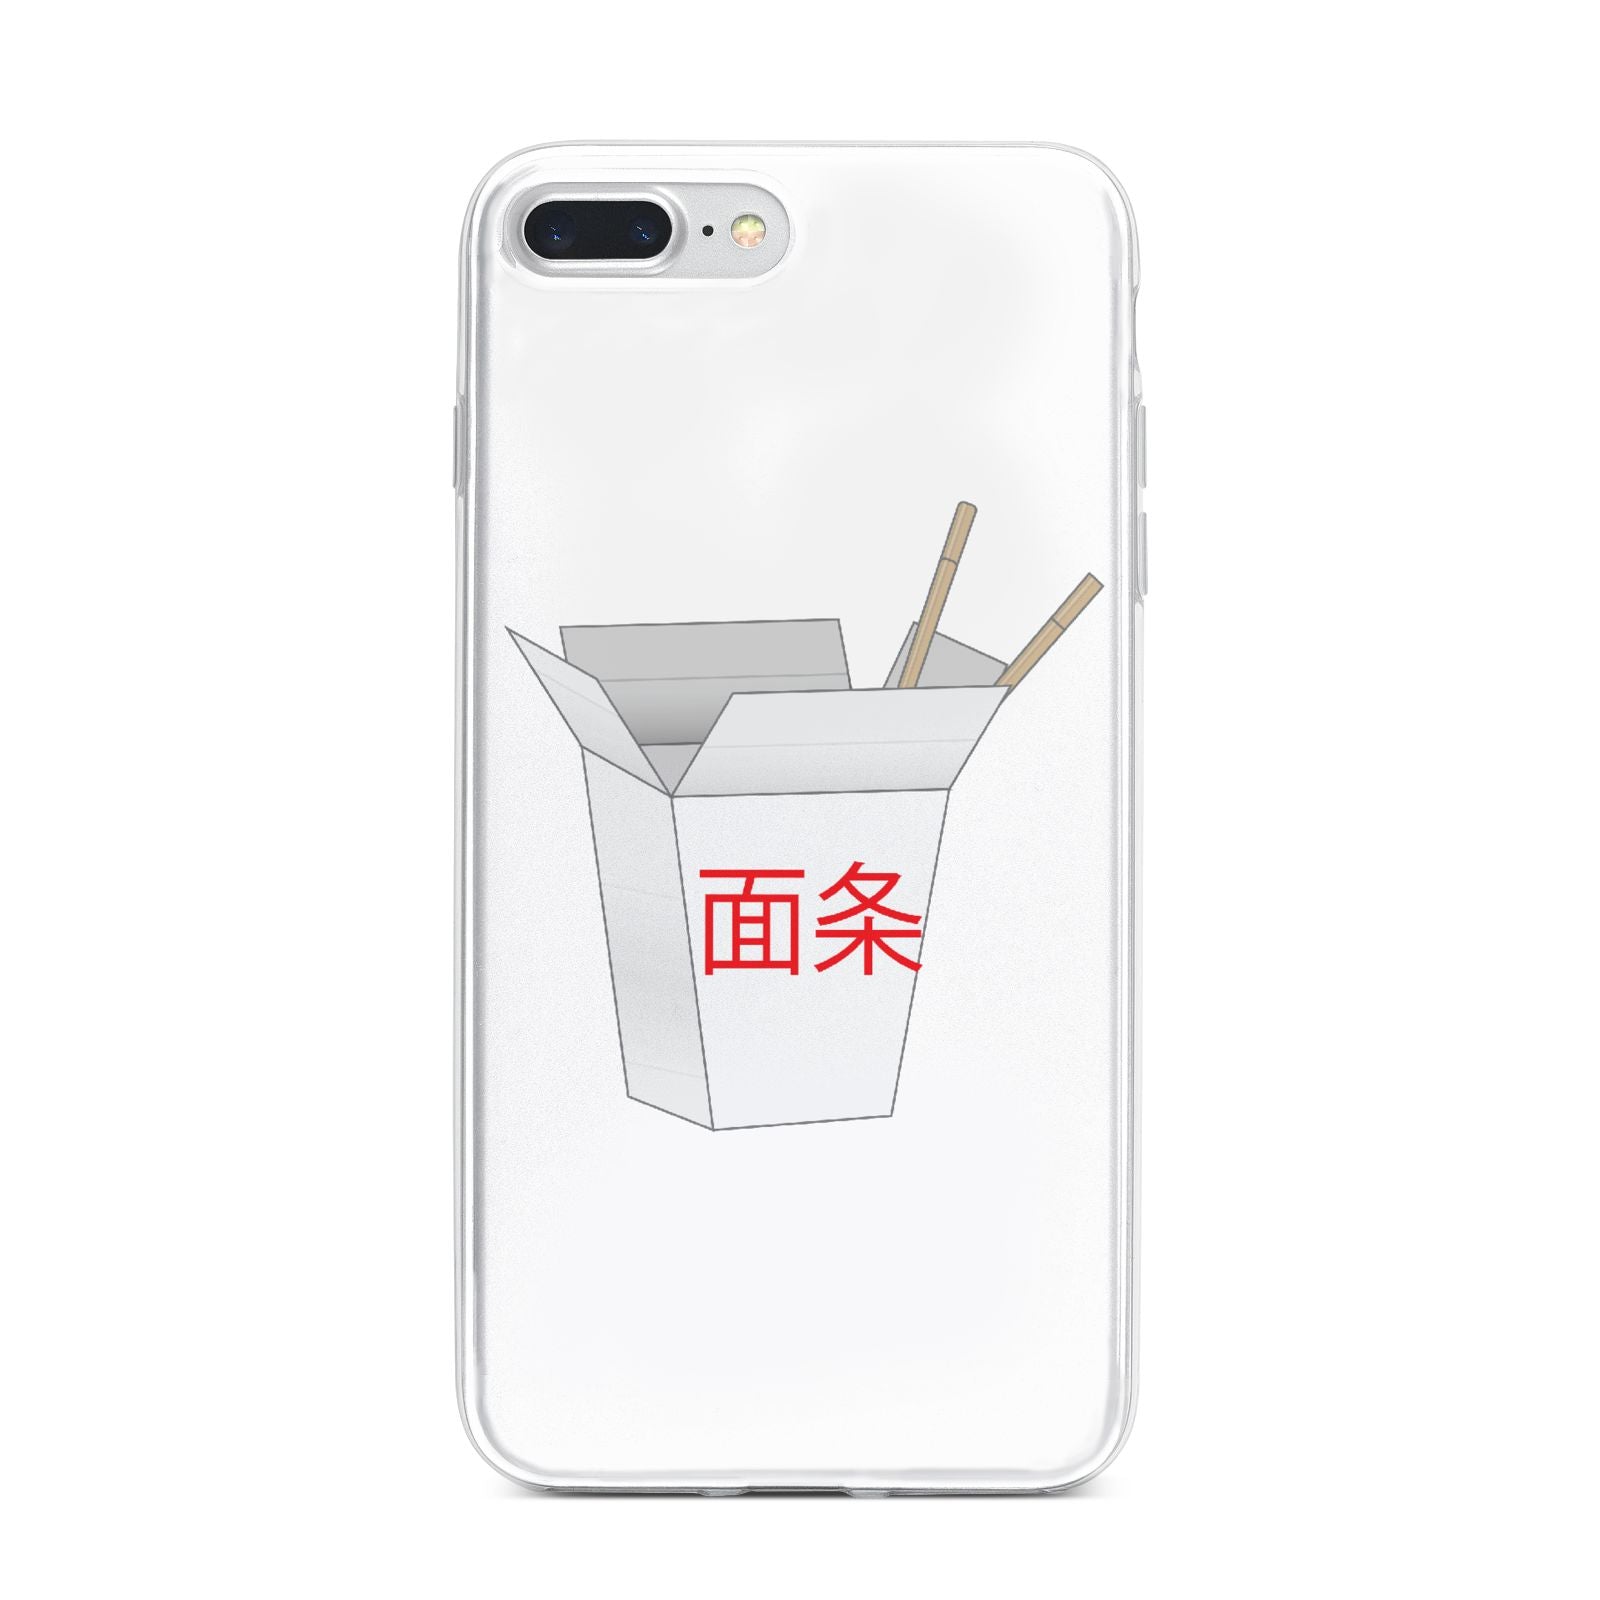 Chinese Takeaway Box iPhone 7 Plus Bumper Case on Silver iPhone